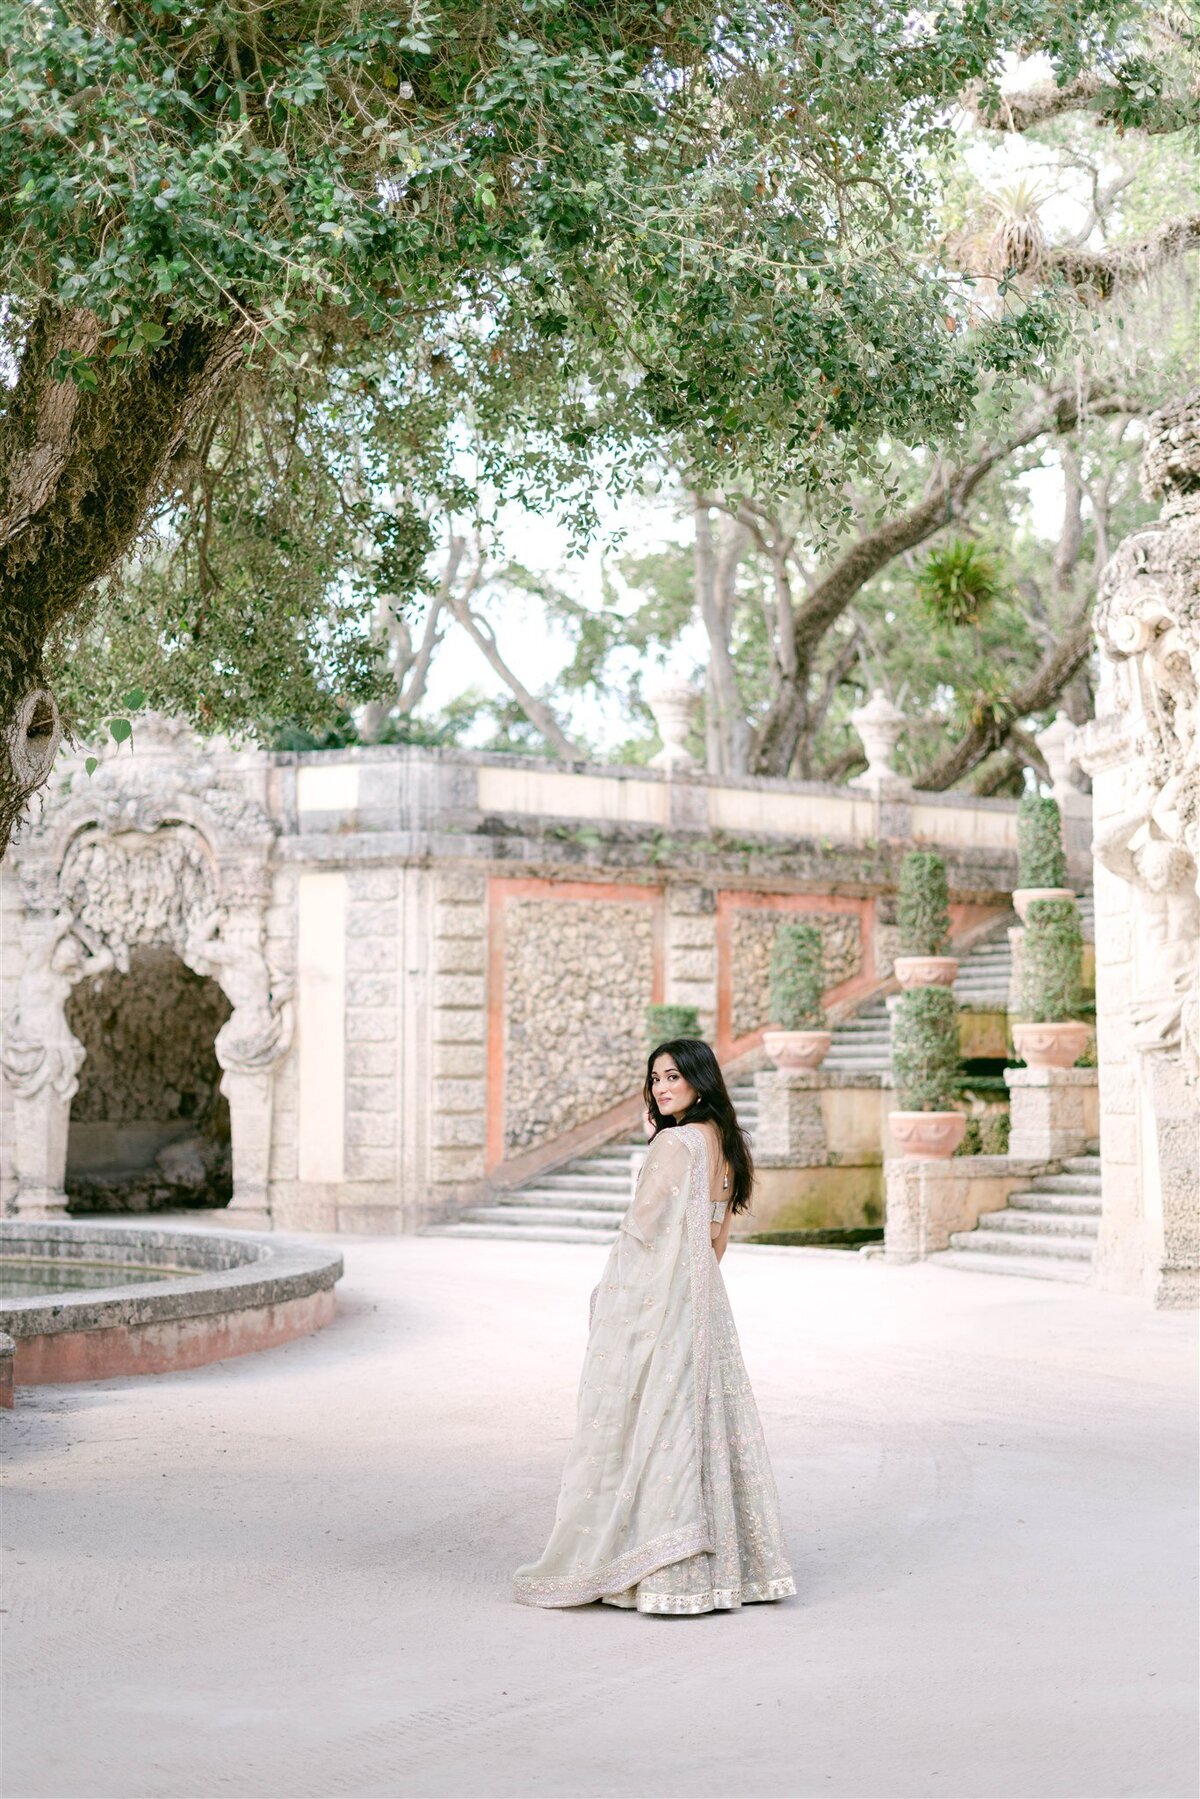 Justine Berges Photography - Vizcaya South Asian Engagement16